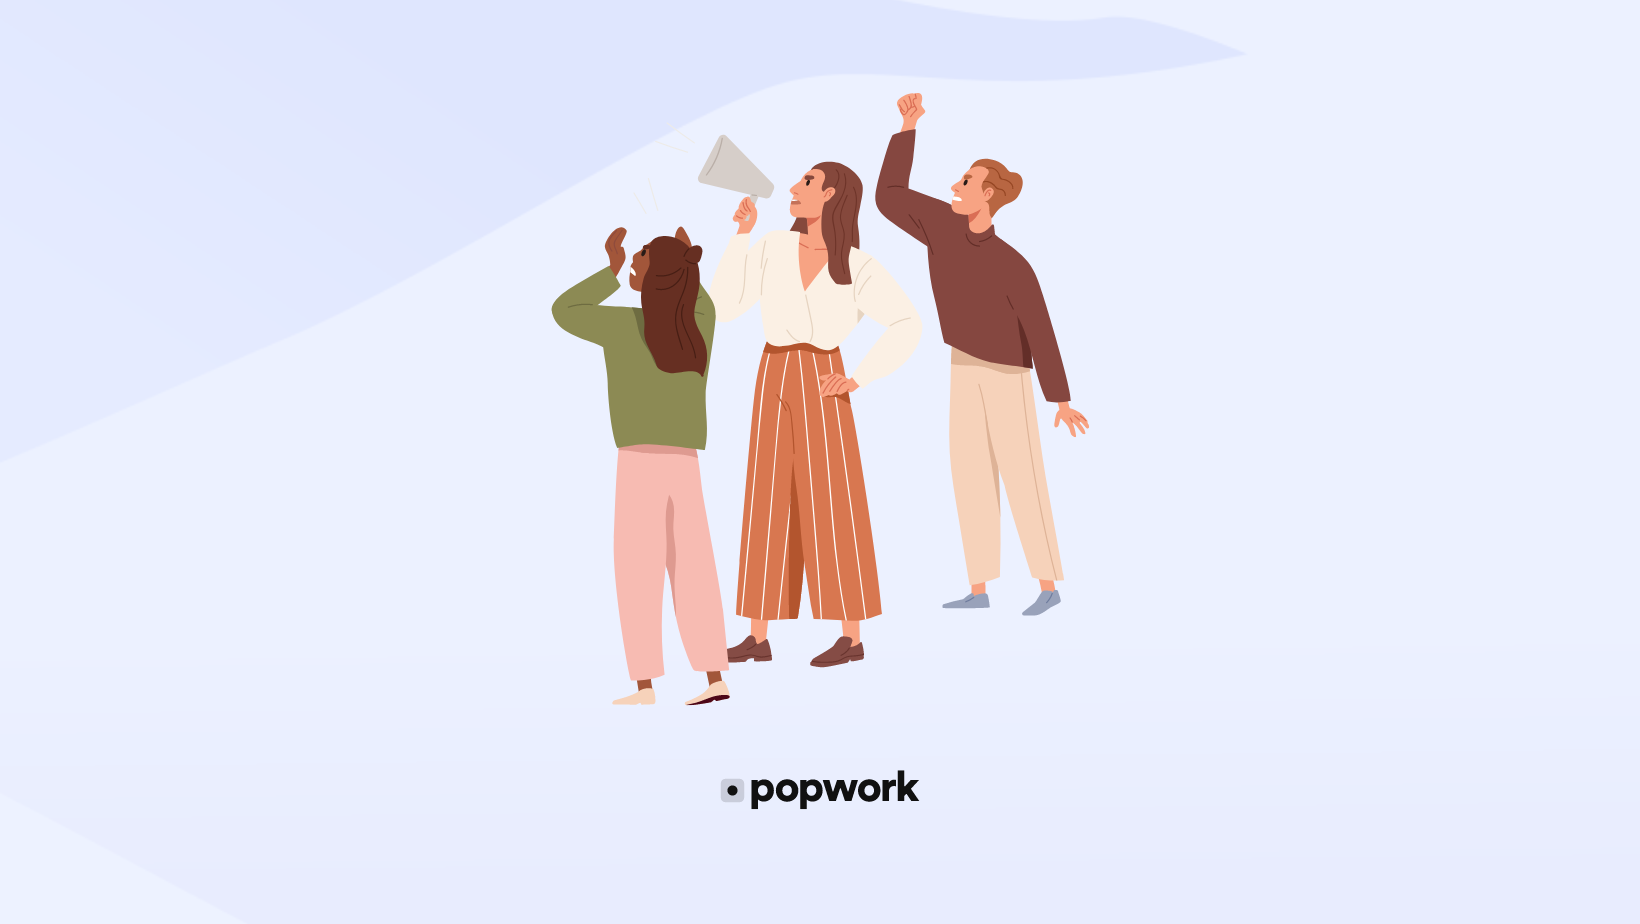 People complaining about something - Popwork